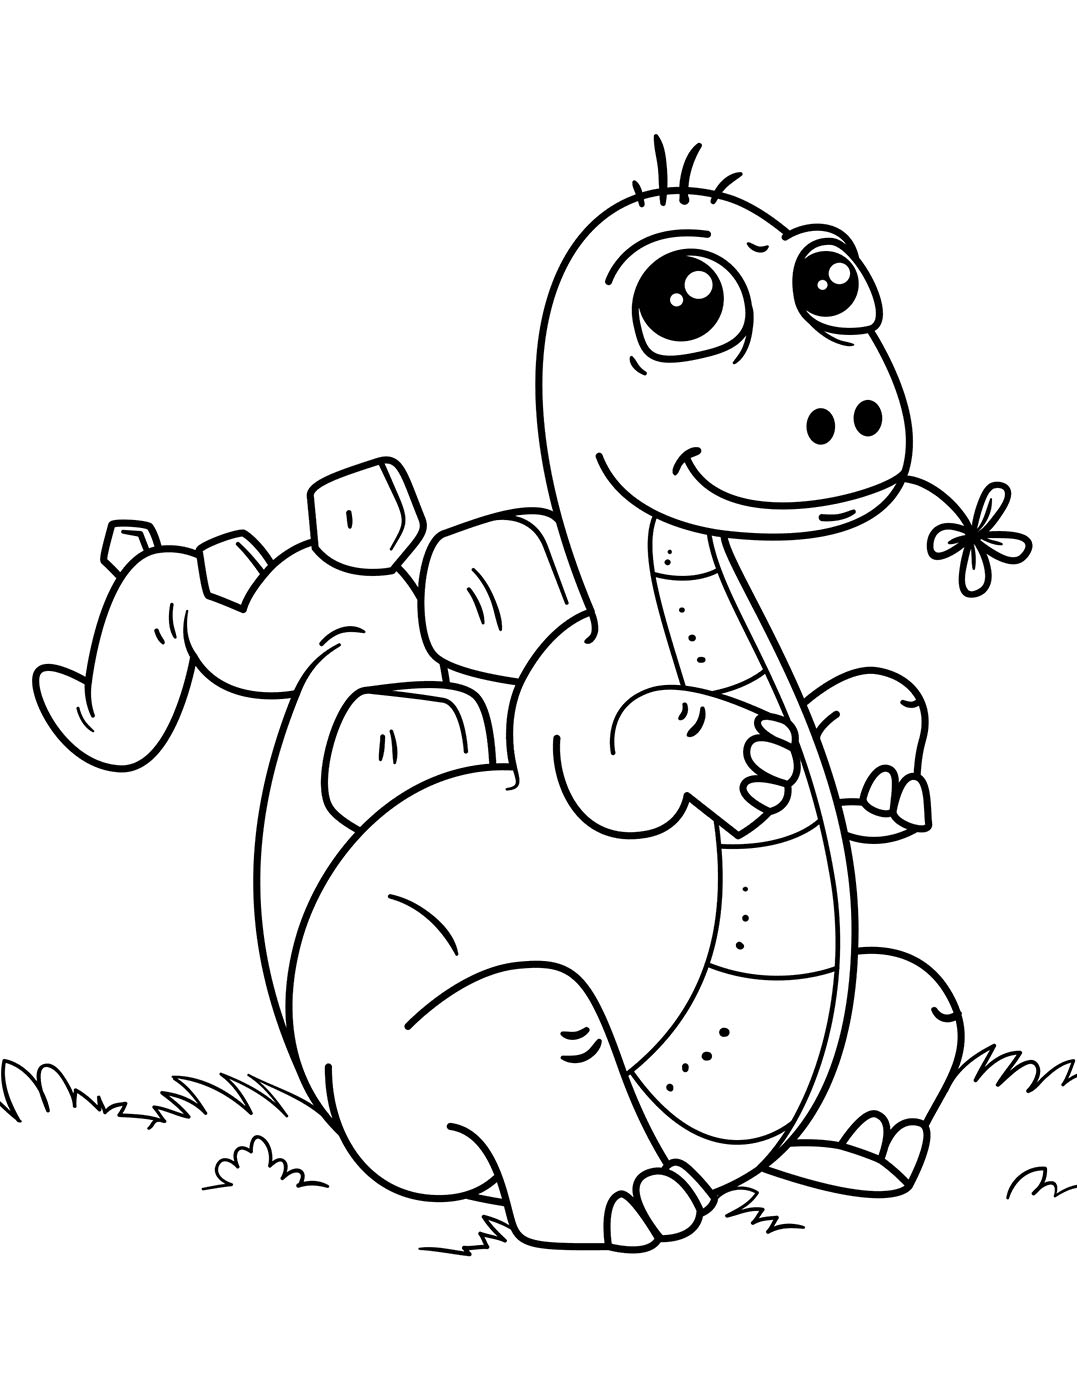 Dinosaurs to color for kids : Ba - Dinosaurs Kids Coloring Pages